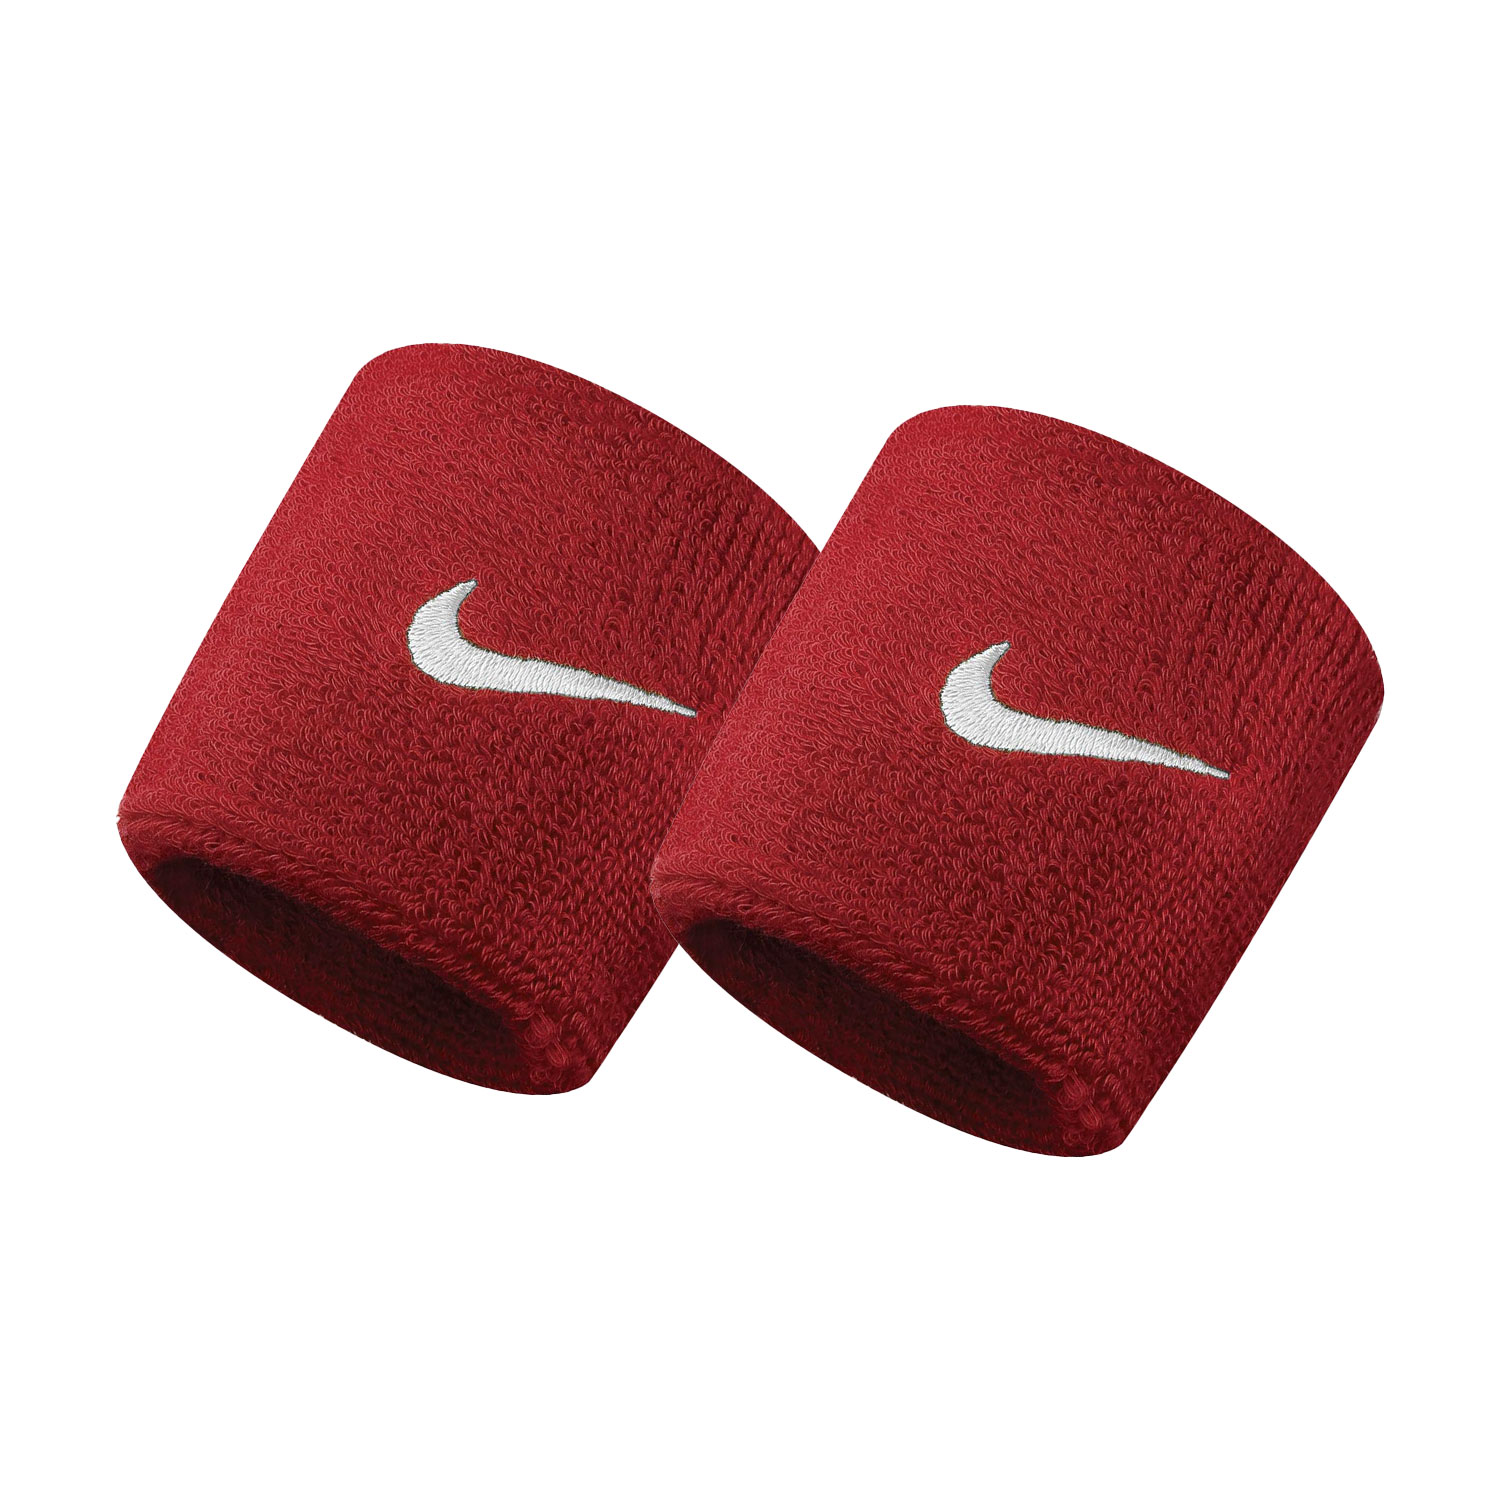 Nike Swoosh Small Wristbands - Red/White